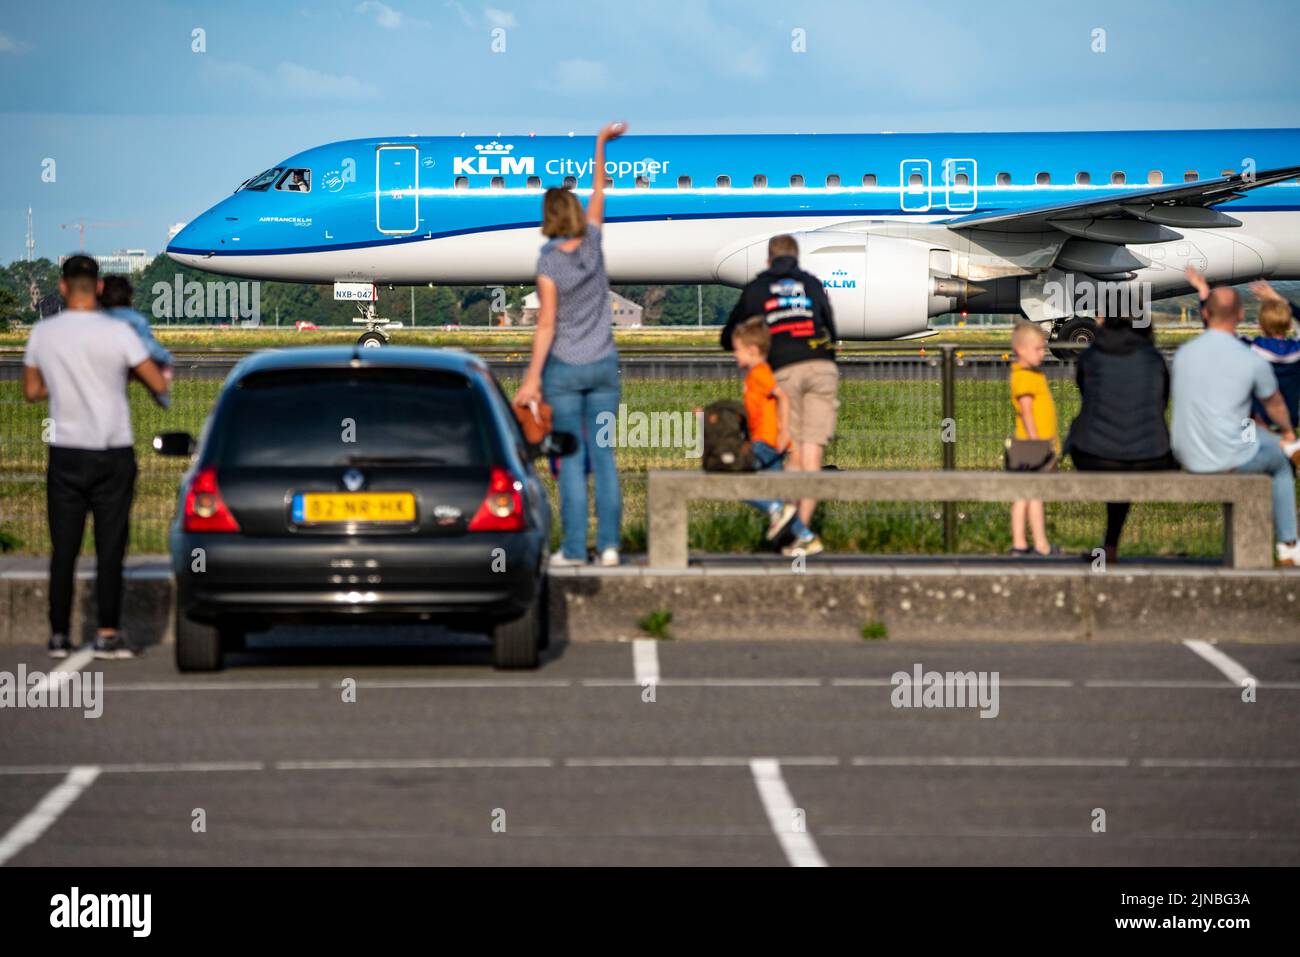 Amsterdam Shiphol Airport, Polderbaan, one of 6 runways, spotter spot, see planes up close, KLM plane, Stock Photo